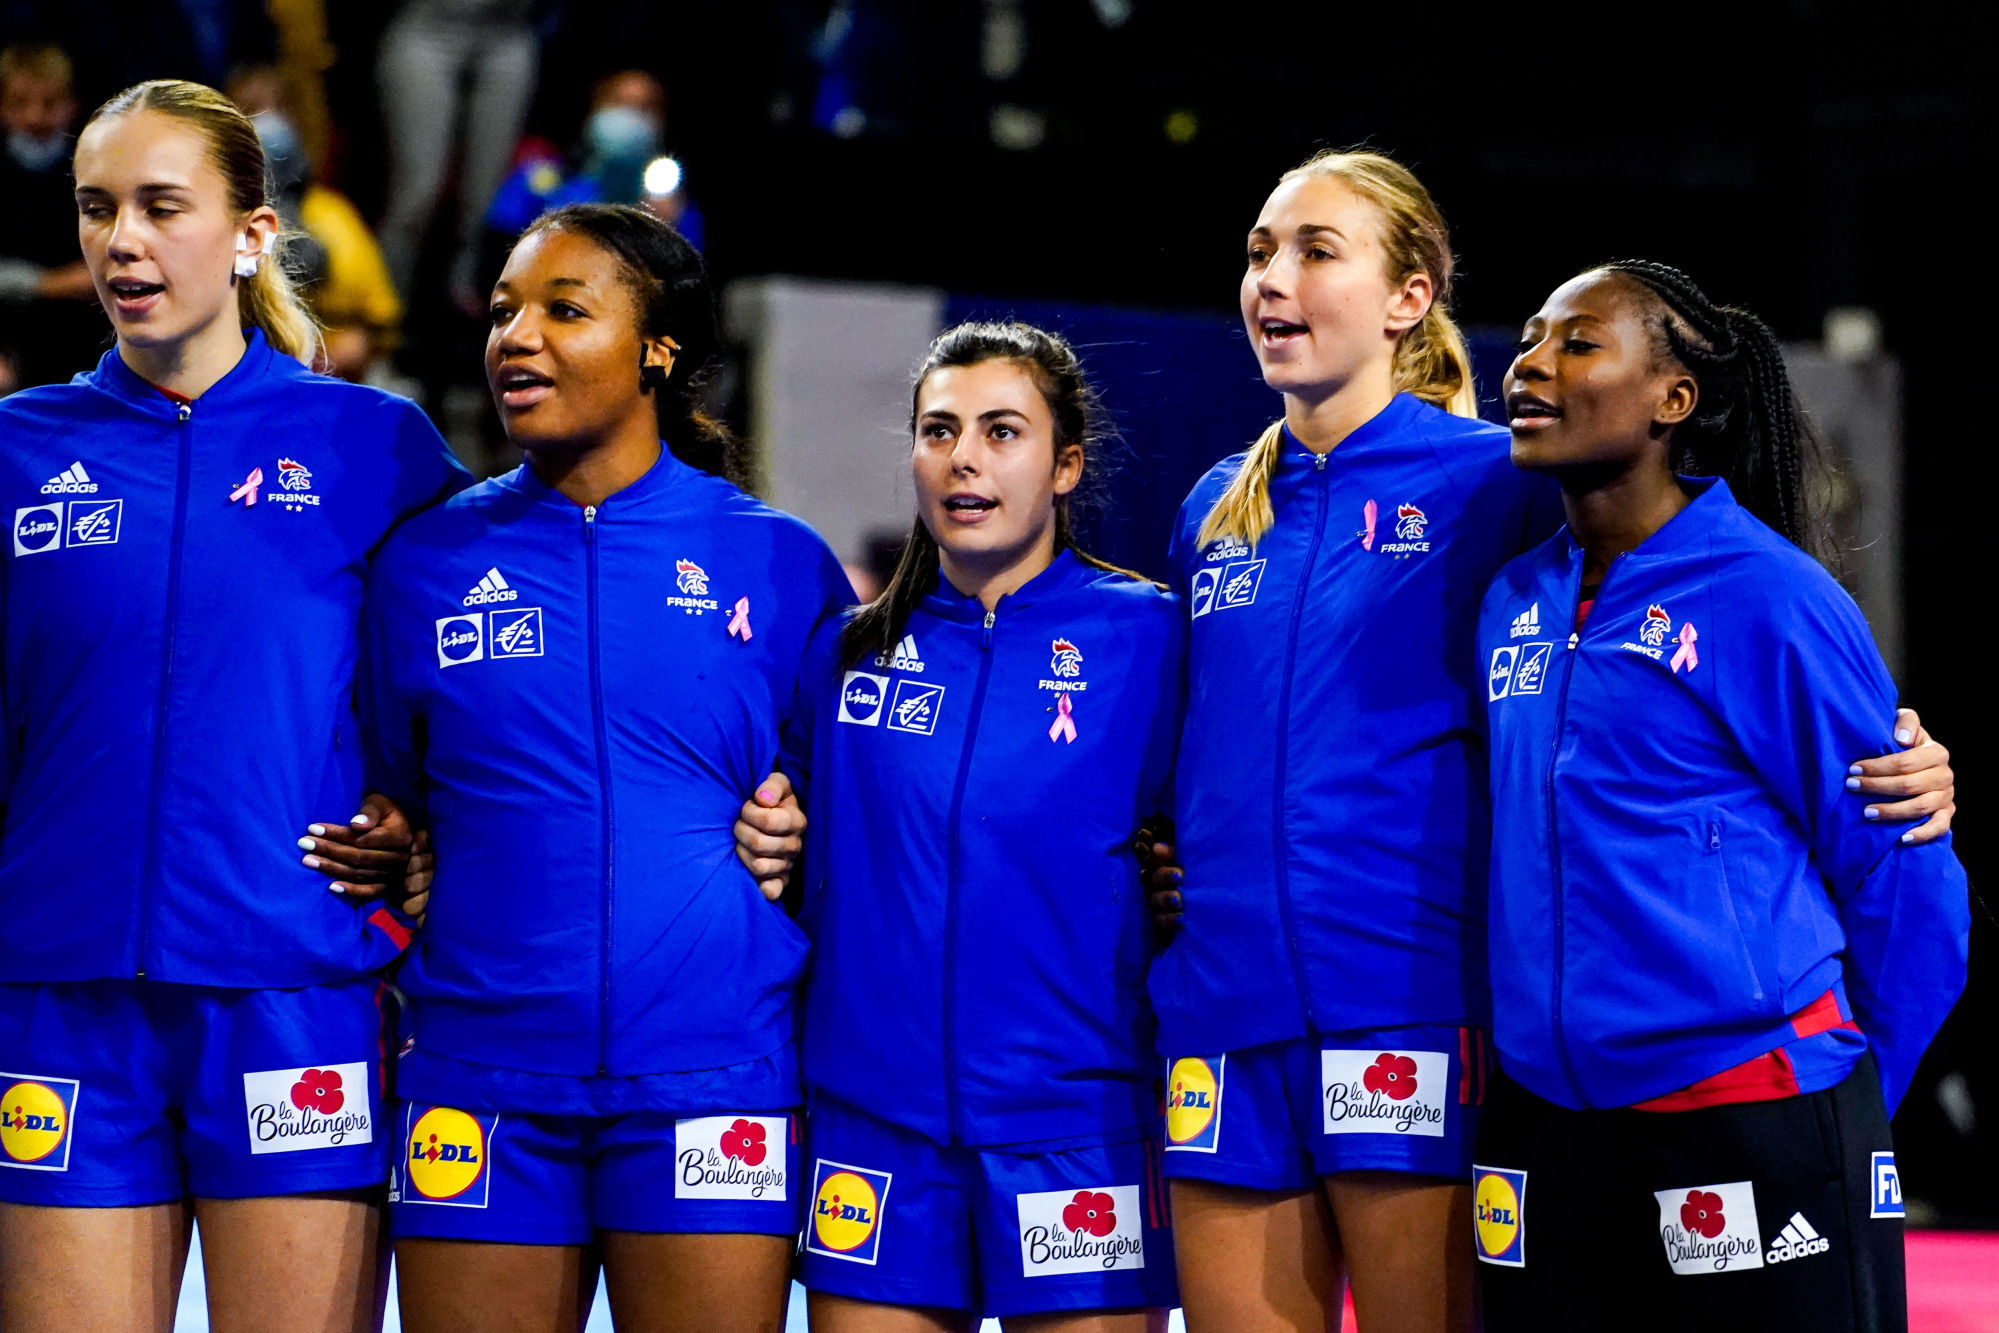 Emma JACQUES of France, Pauletta FOPPA of France, Lucie GRANIER of France, Perrine PETIOT of France and Catherine GABRIEL of France during National Anthem during the European Championship Women, Qualification match between France and Czech Republic on October 6, 2021 in Besancon, France. (Photo by Hugo Pfeiffer/Icon Sport) - Lucie GRANIER - Catherine GABRIEL - Pauletta FOPPA - Emma JACQUES - Perrine PETIOT - Besancon (France)